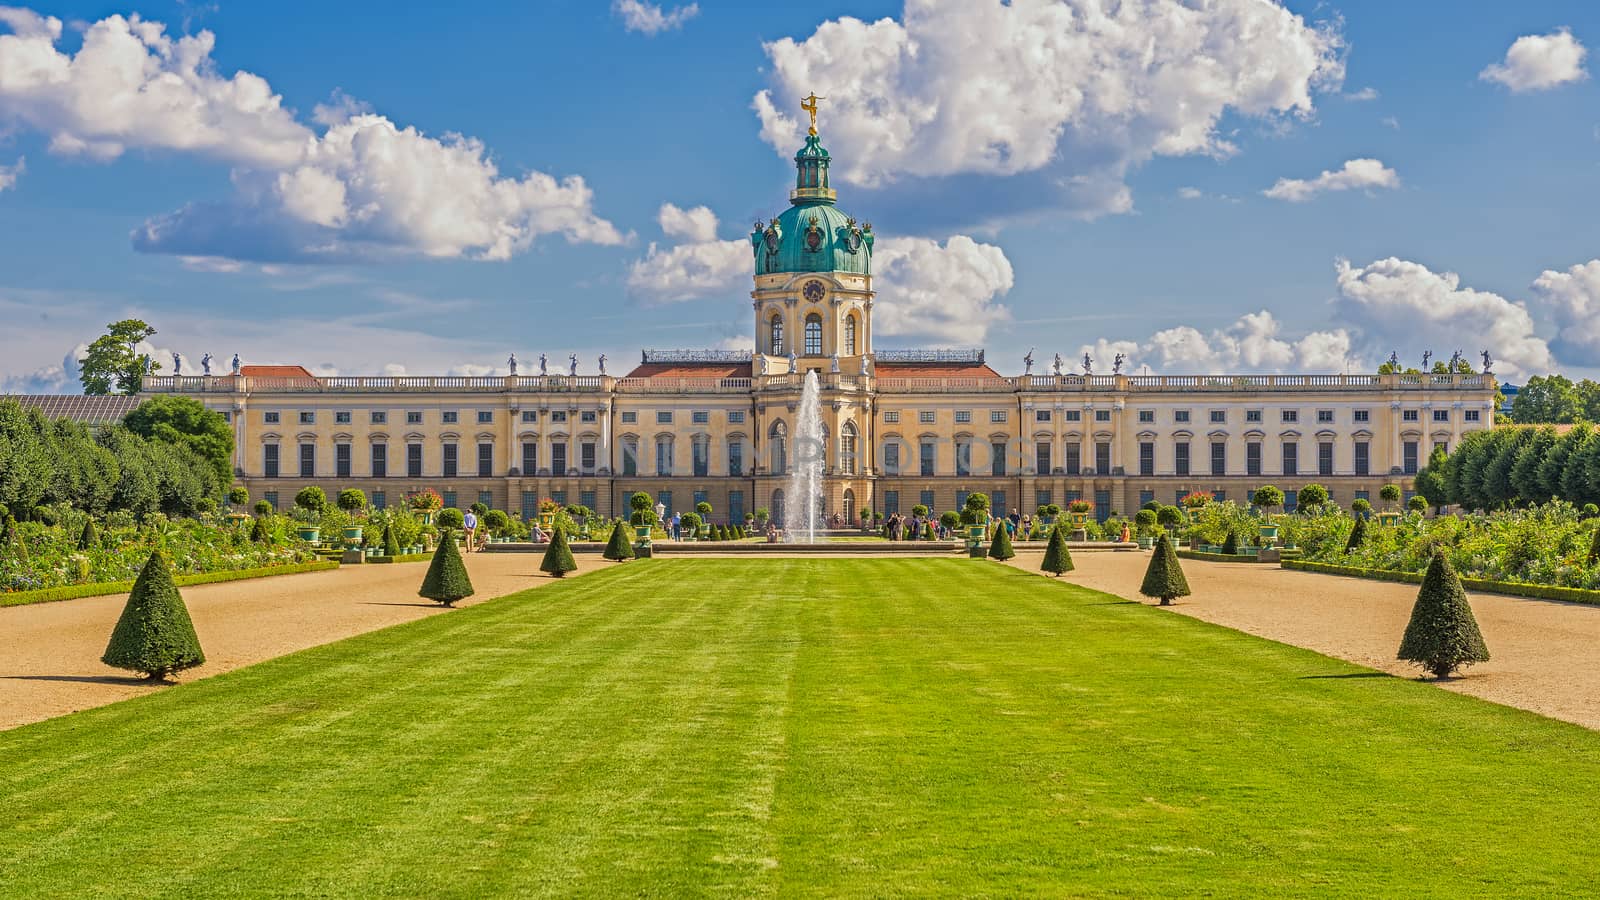 Schloss Charlottenburg also known as Charlottenburg Palace with garden in Berlin. It is the largest palace and the only surviving royal residence in the city.